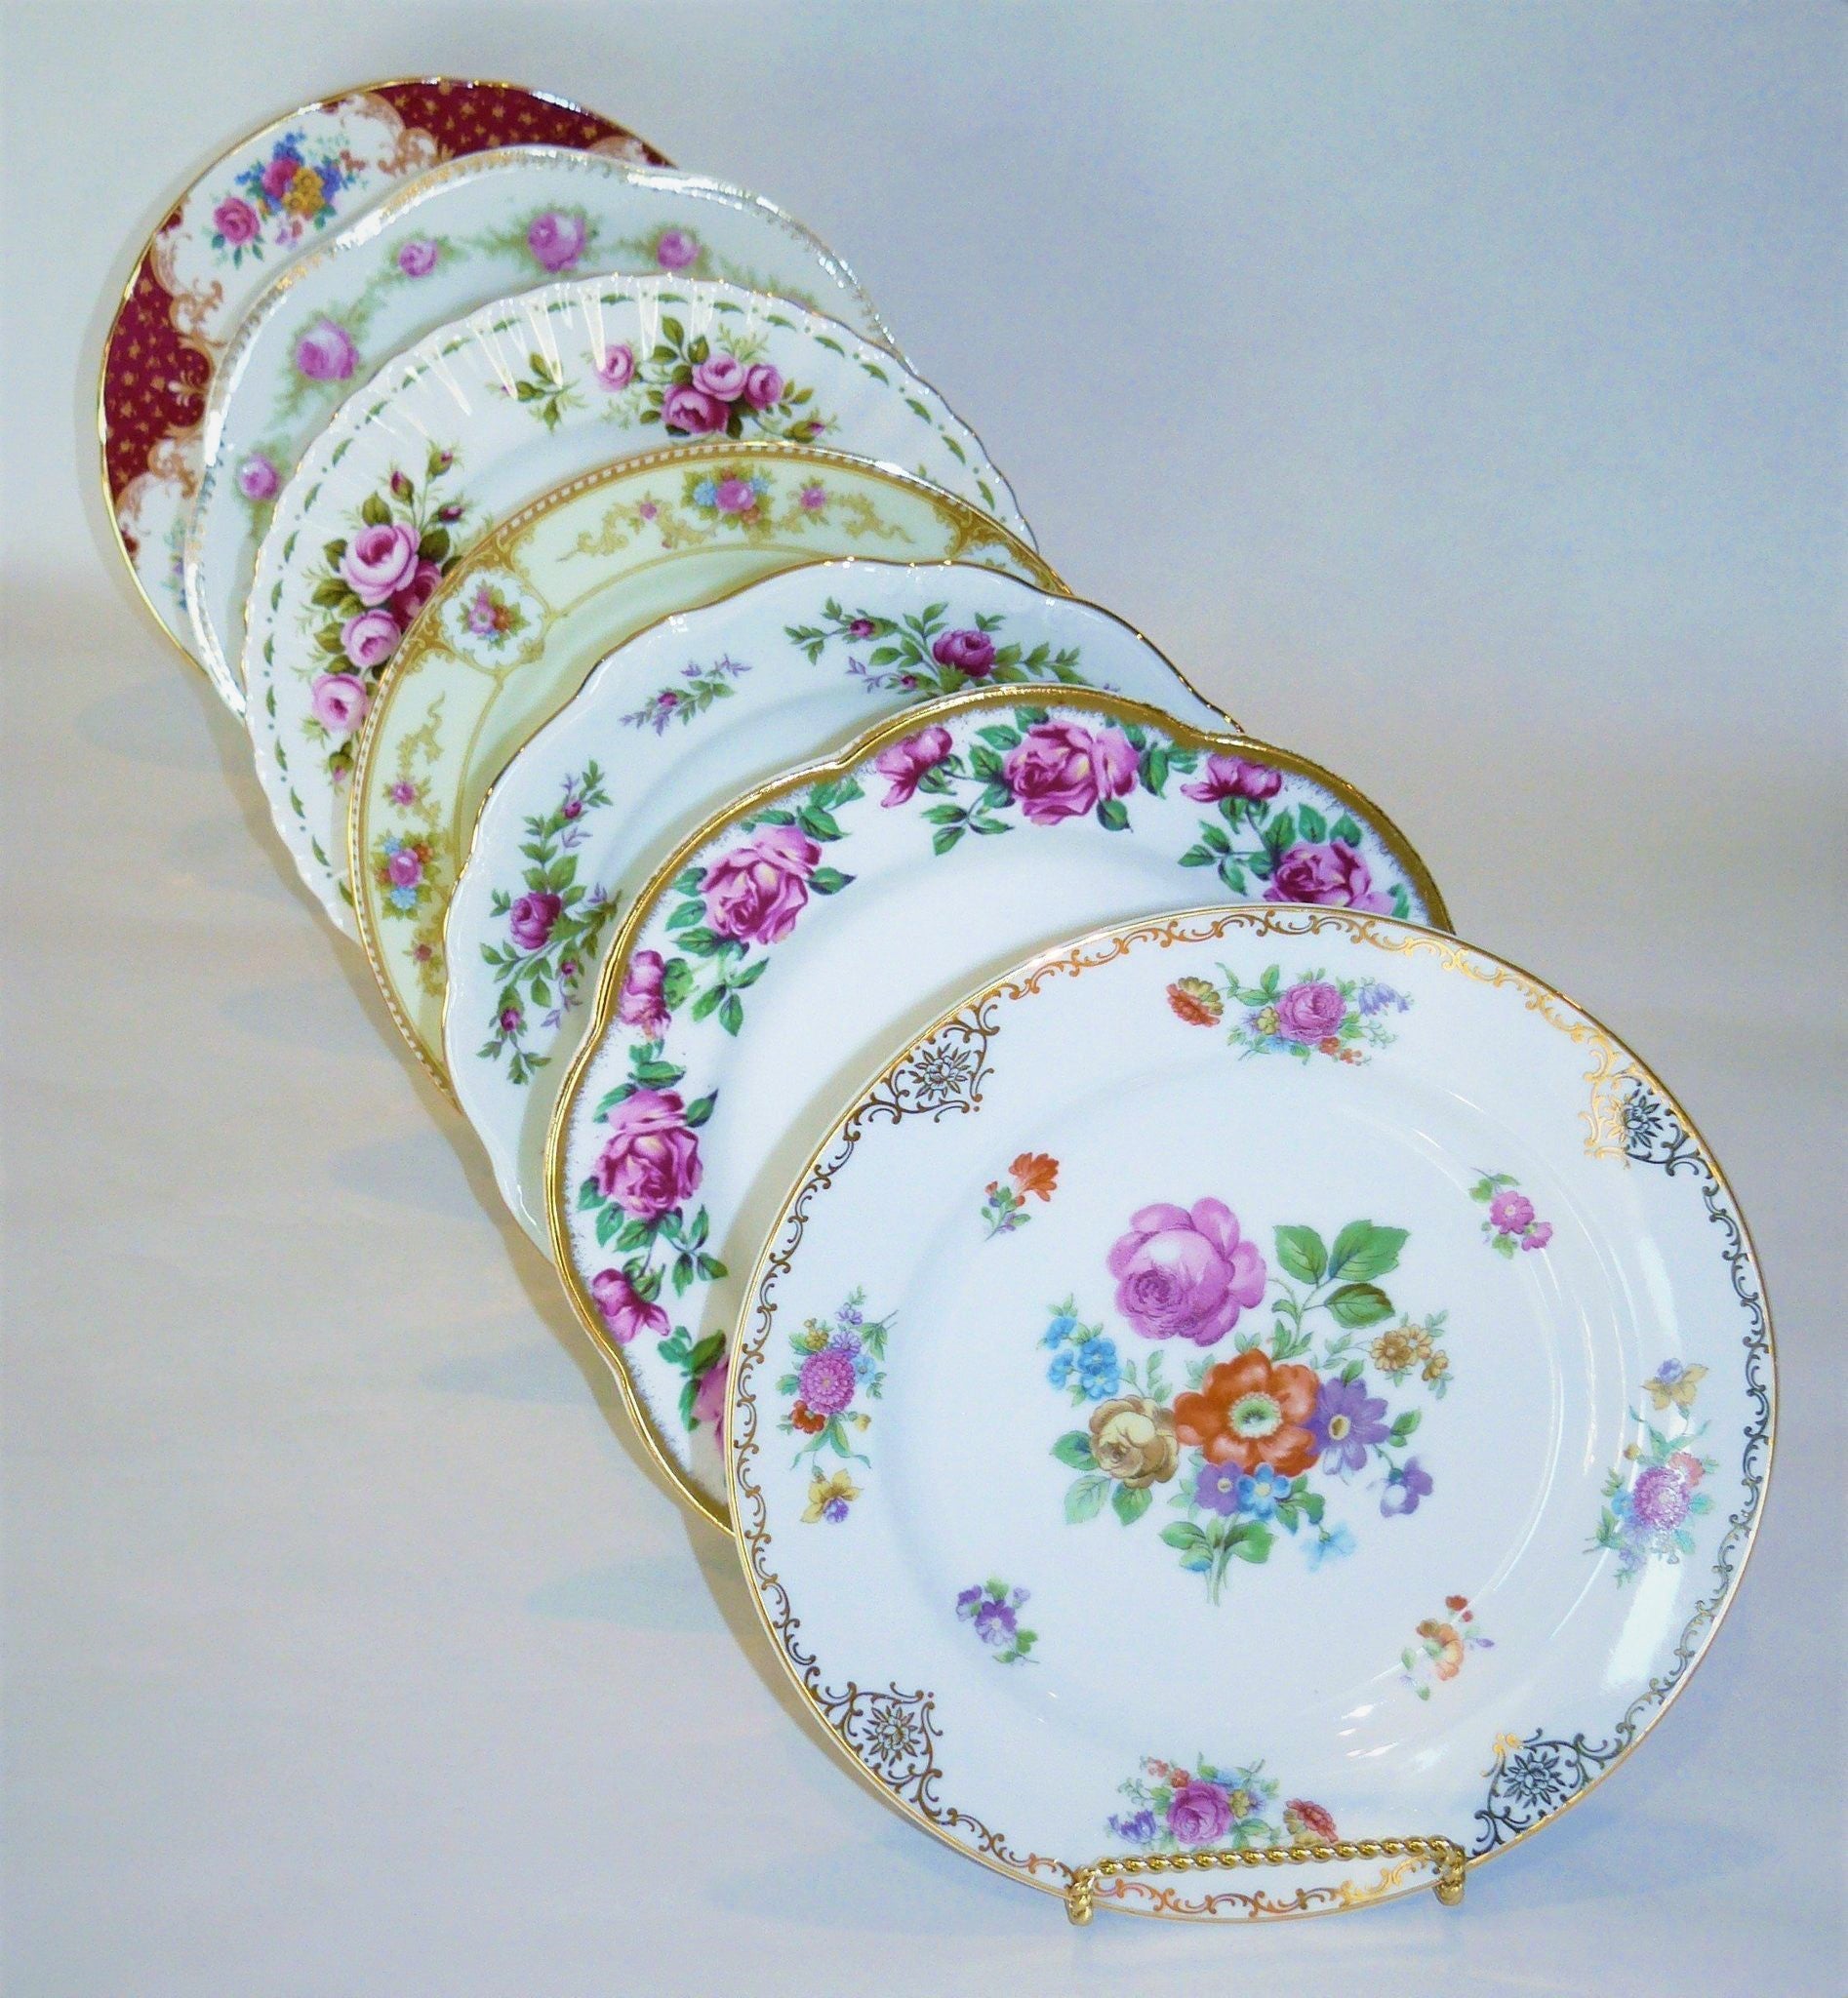 Vintage Dessert Plates - Vintage Party Rentals by Royal Table Settings